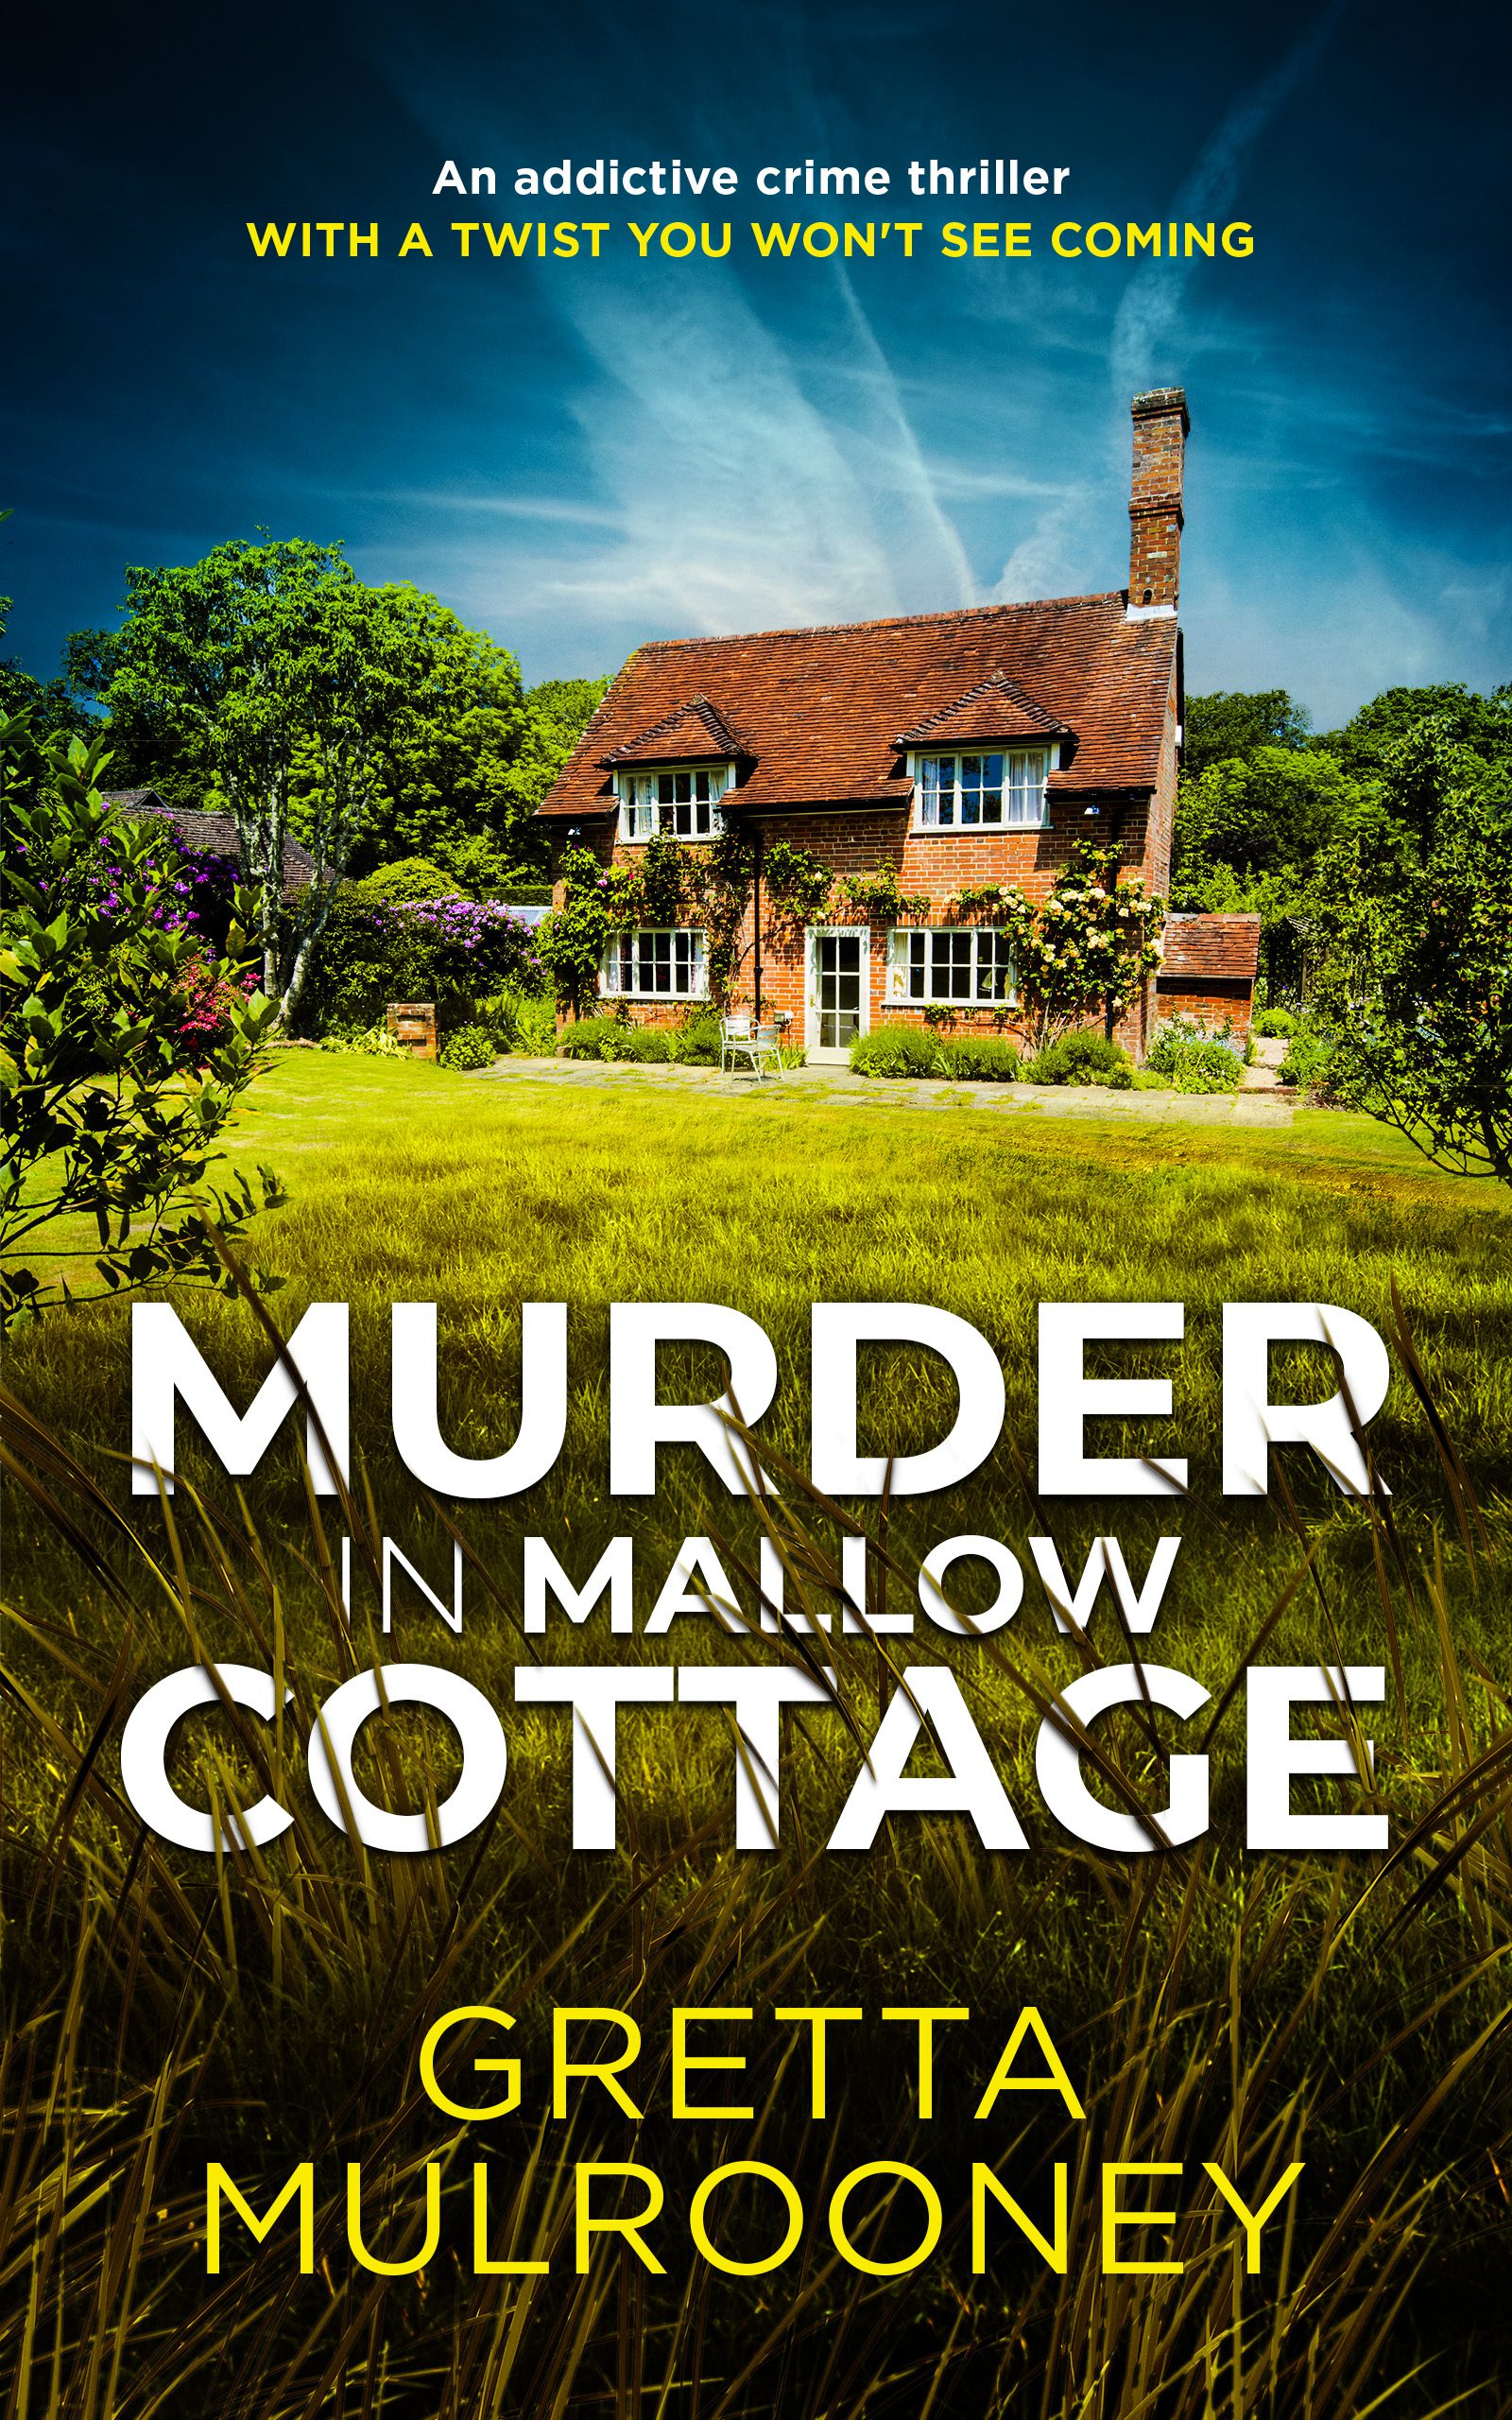 Murder in Mallow Cottage book cover